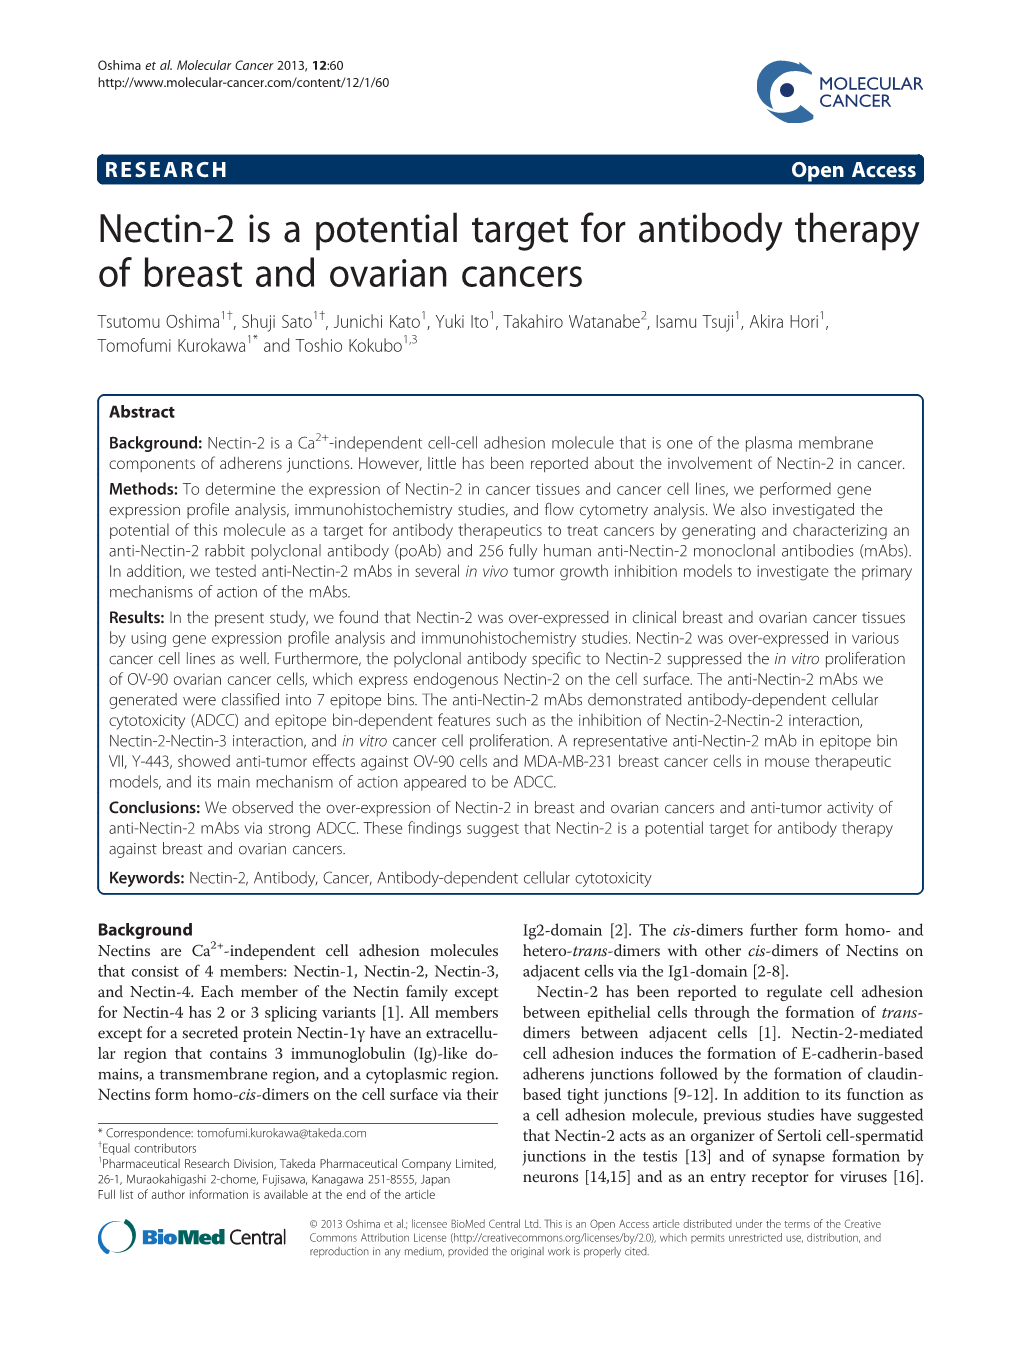 Nectin-2 Is a Potential Target for Antibody Therapy of Breast And